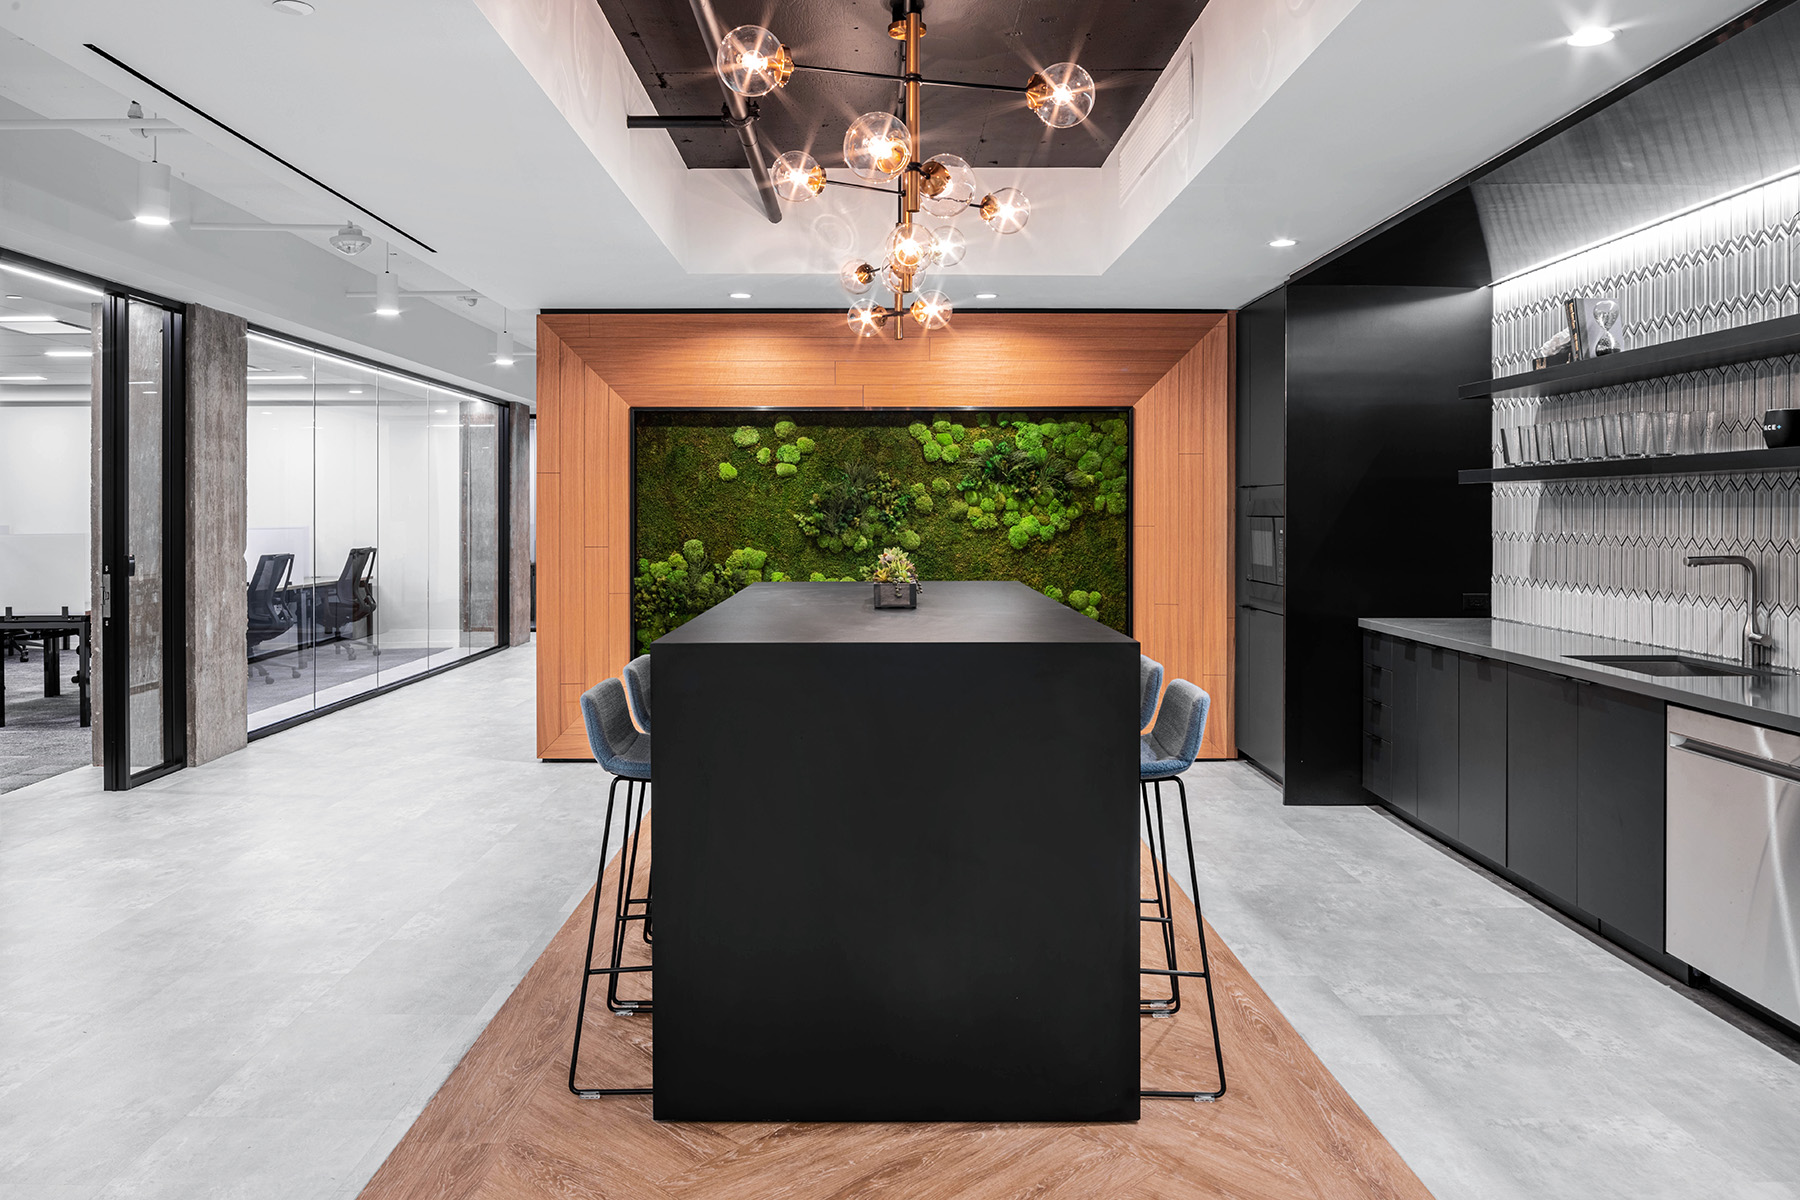 Collective Architecture used lighting and architectural details, such as wood finishes and an artificial green wall, to give the illusion of a natural environment.